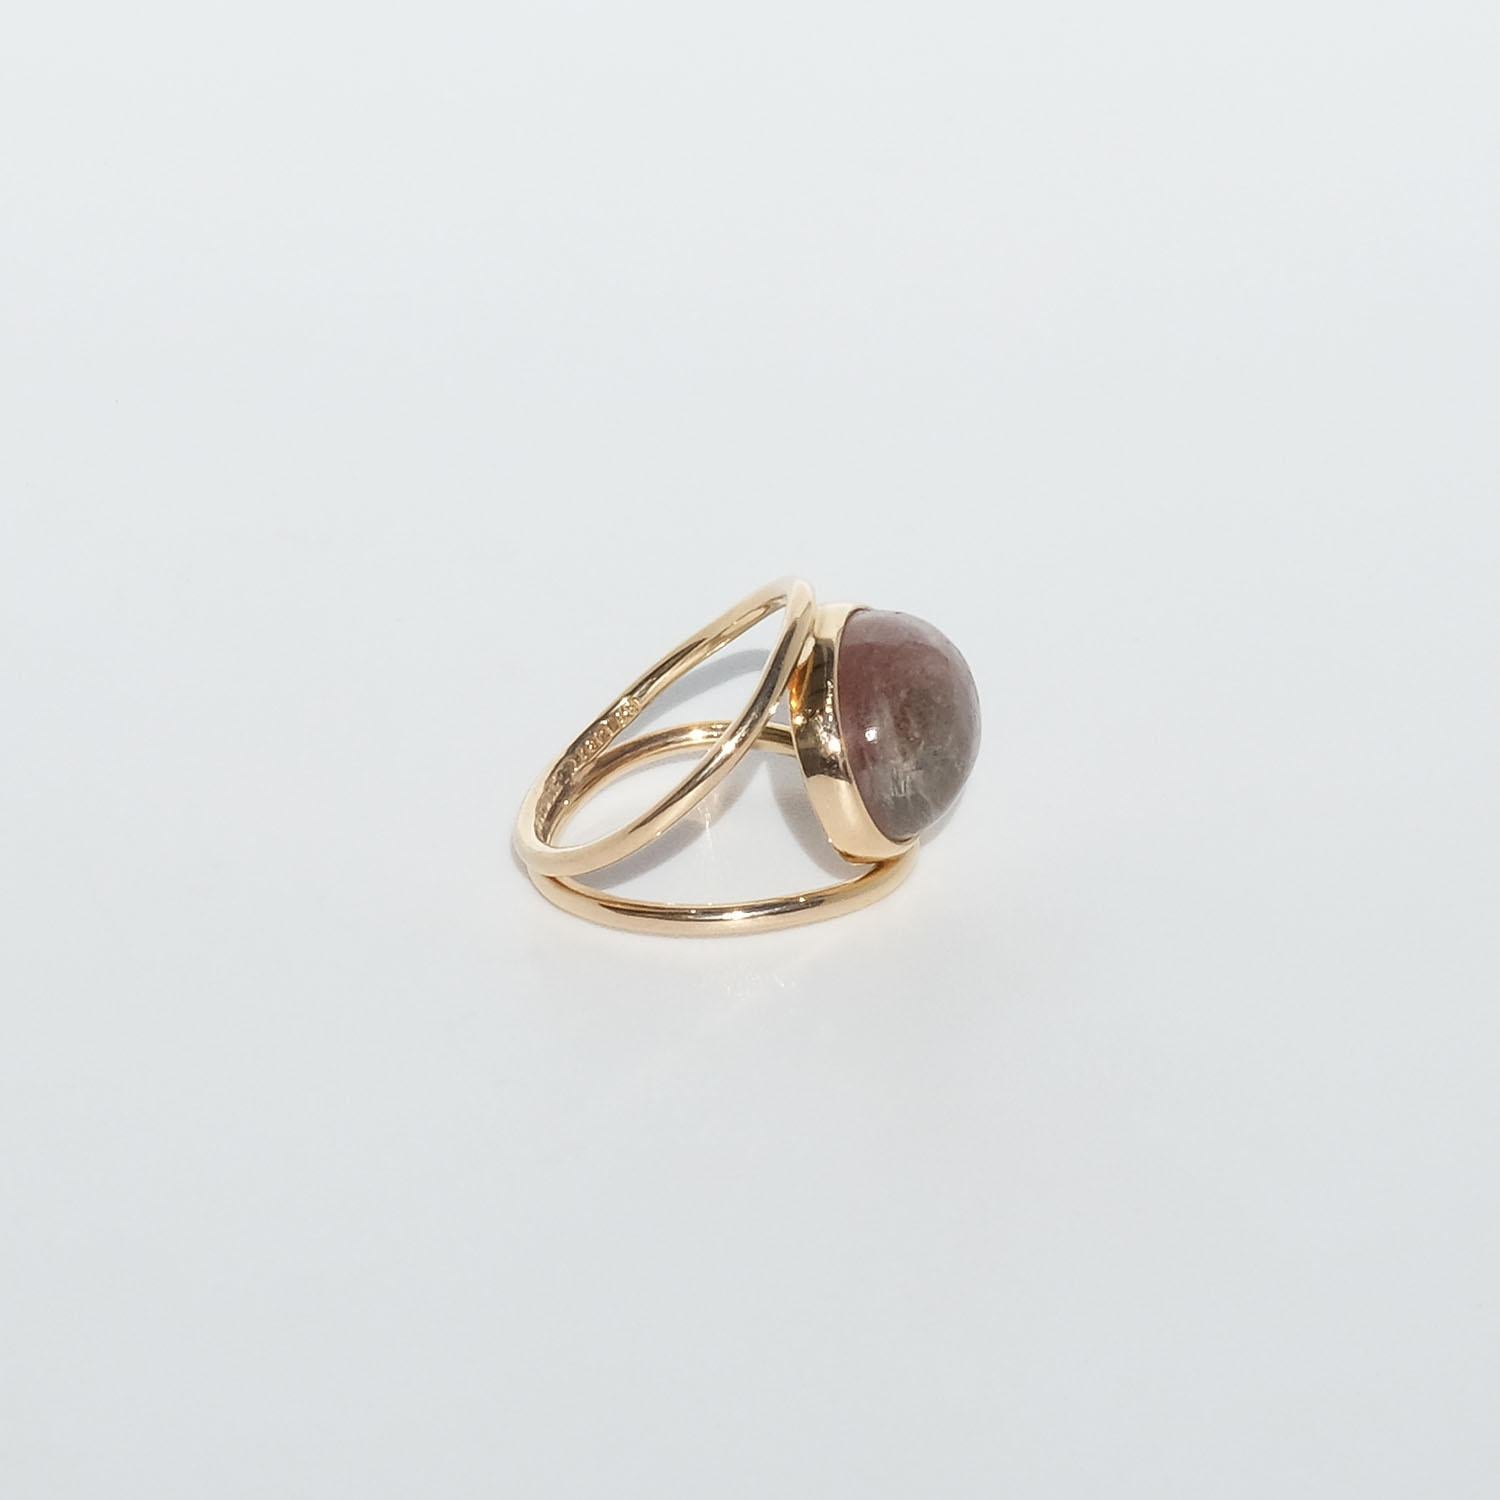 Vintage 18k Gold and Pink Tourmaline Ring by Swedish Master Rey Urban Year 1961 For Sale 1